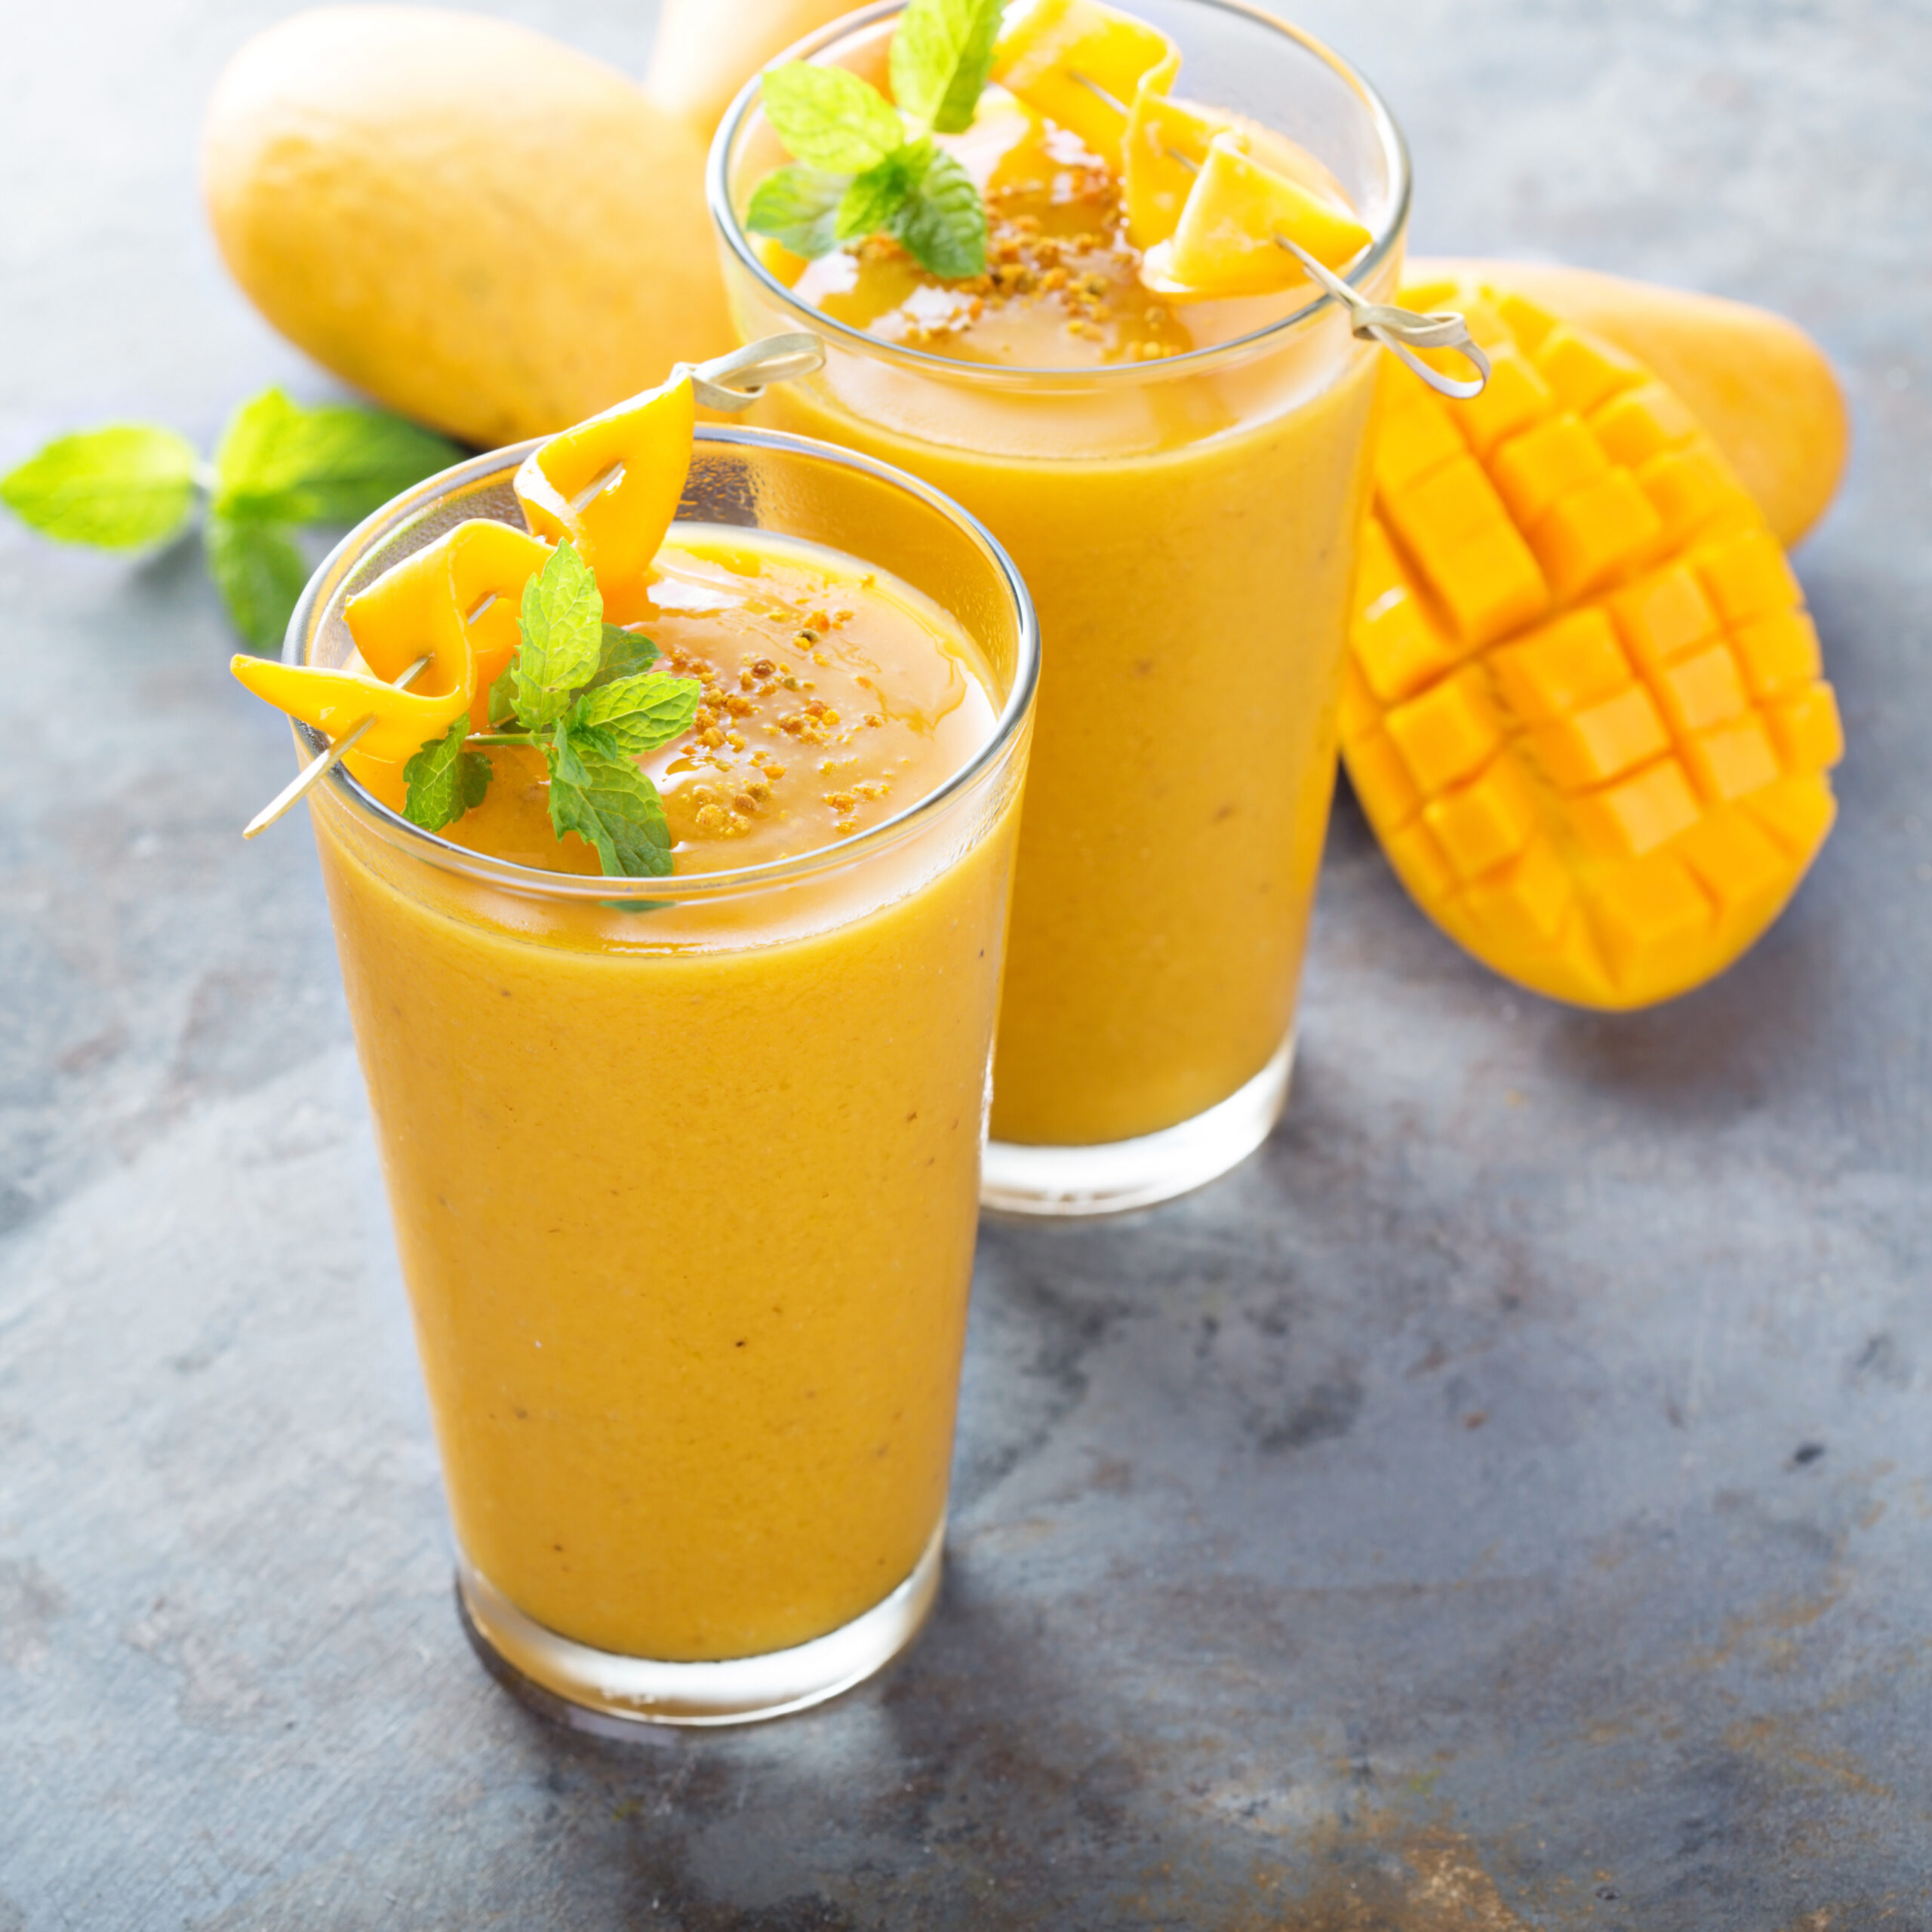 Mango Banana Smoothie Recipe, a healthy and very refreshing drink